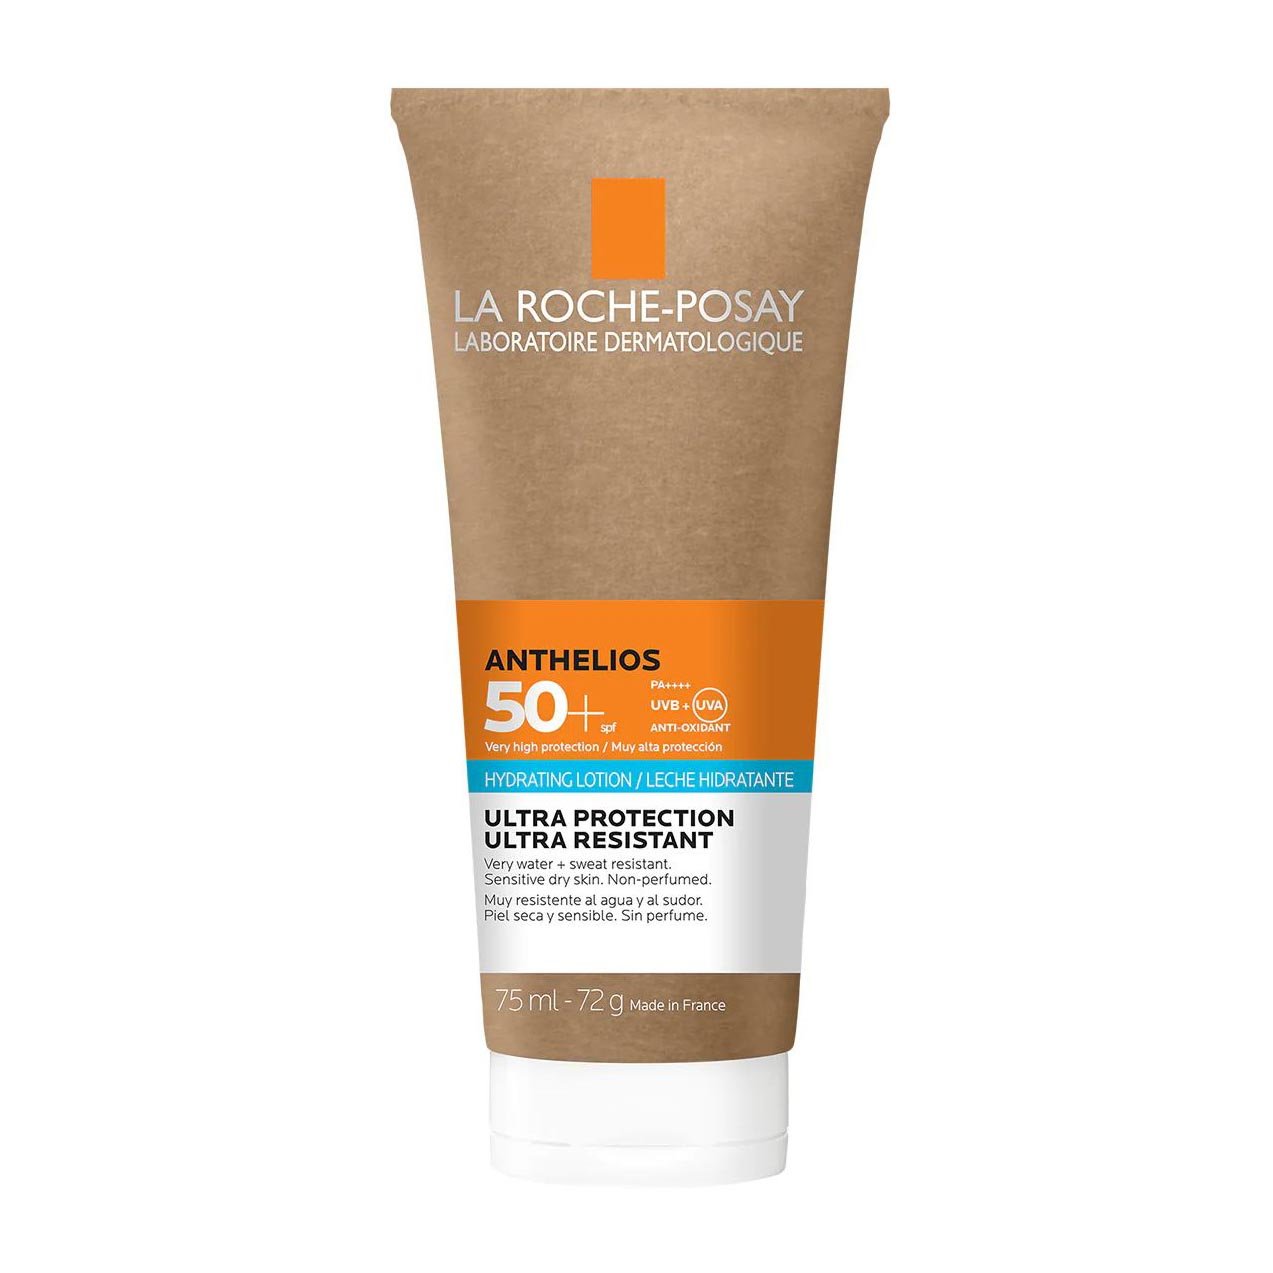 La Roche Posay Anthelios SPF 50+ Hydrating Lotion – 75ml - Bloom Pharmacy